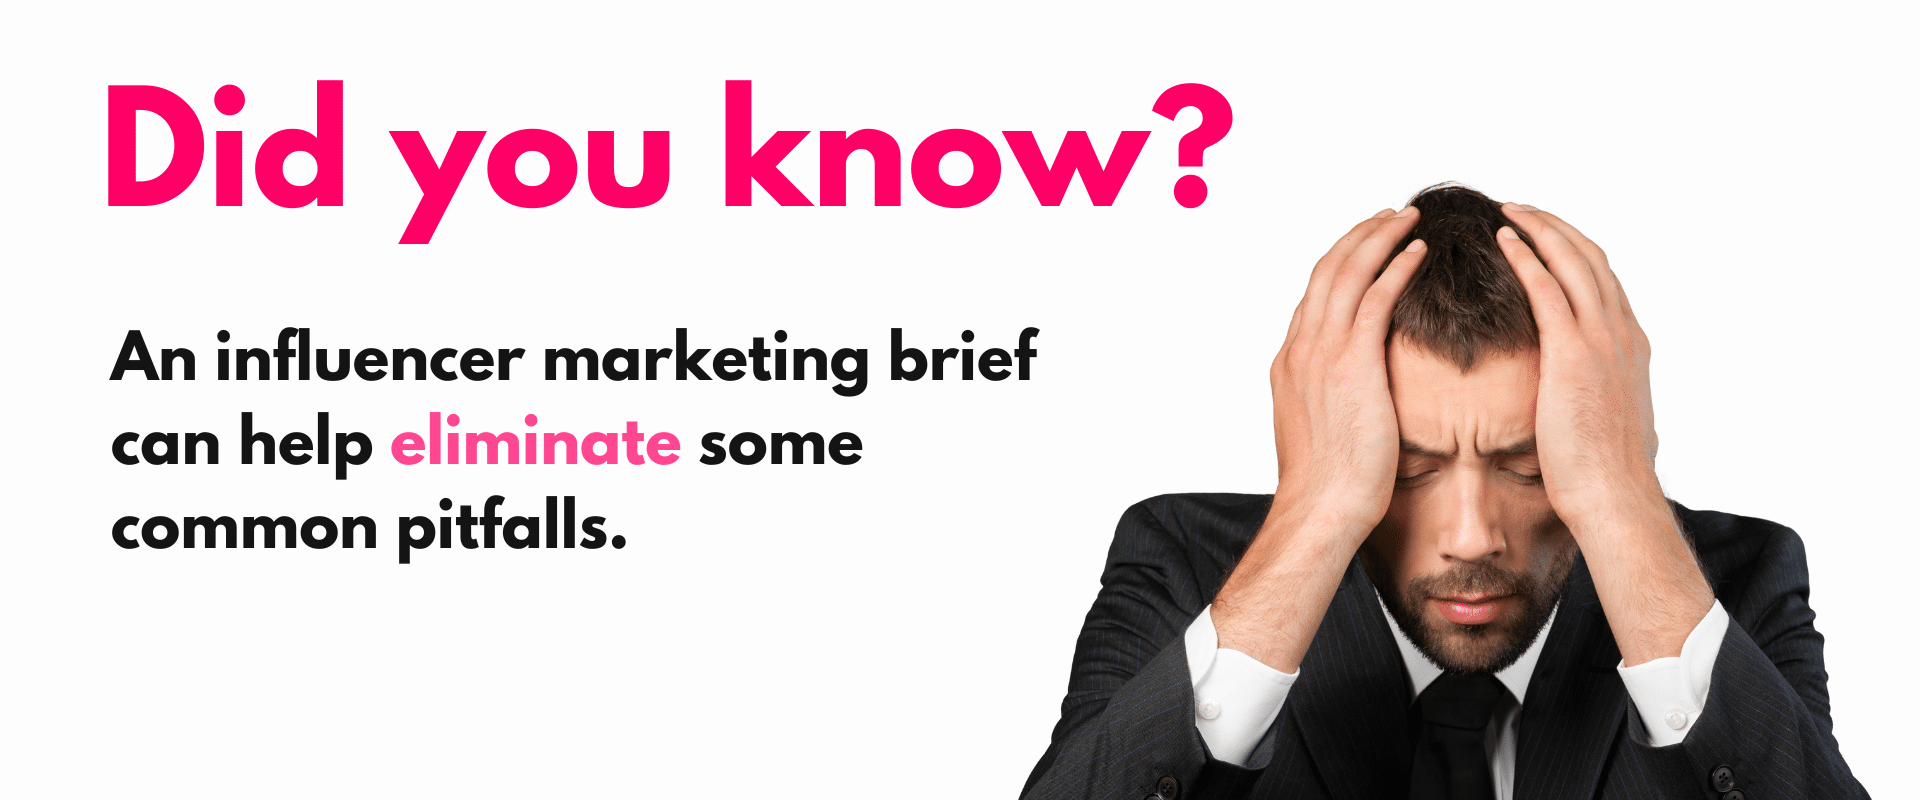 Did you know an influence marketing brief can eliminate some common pitfall.